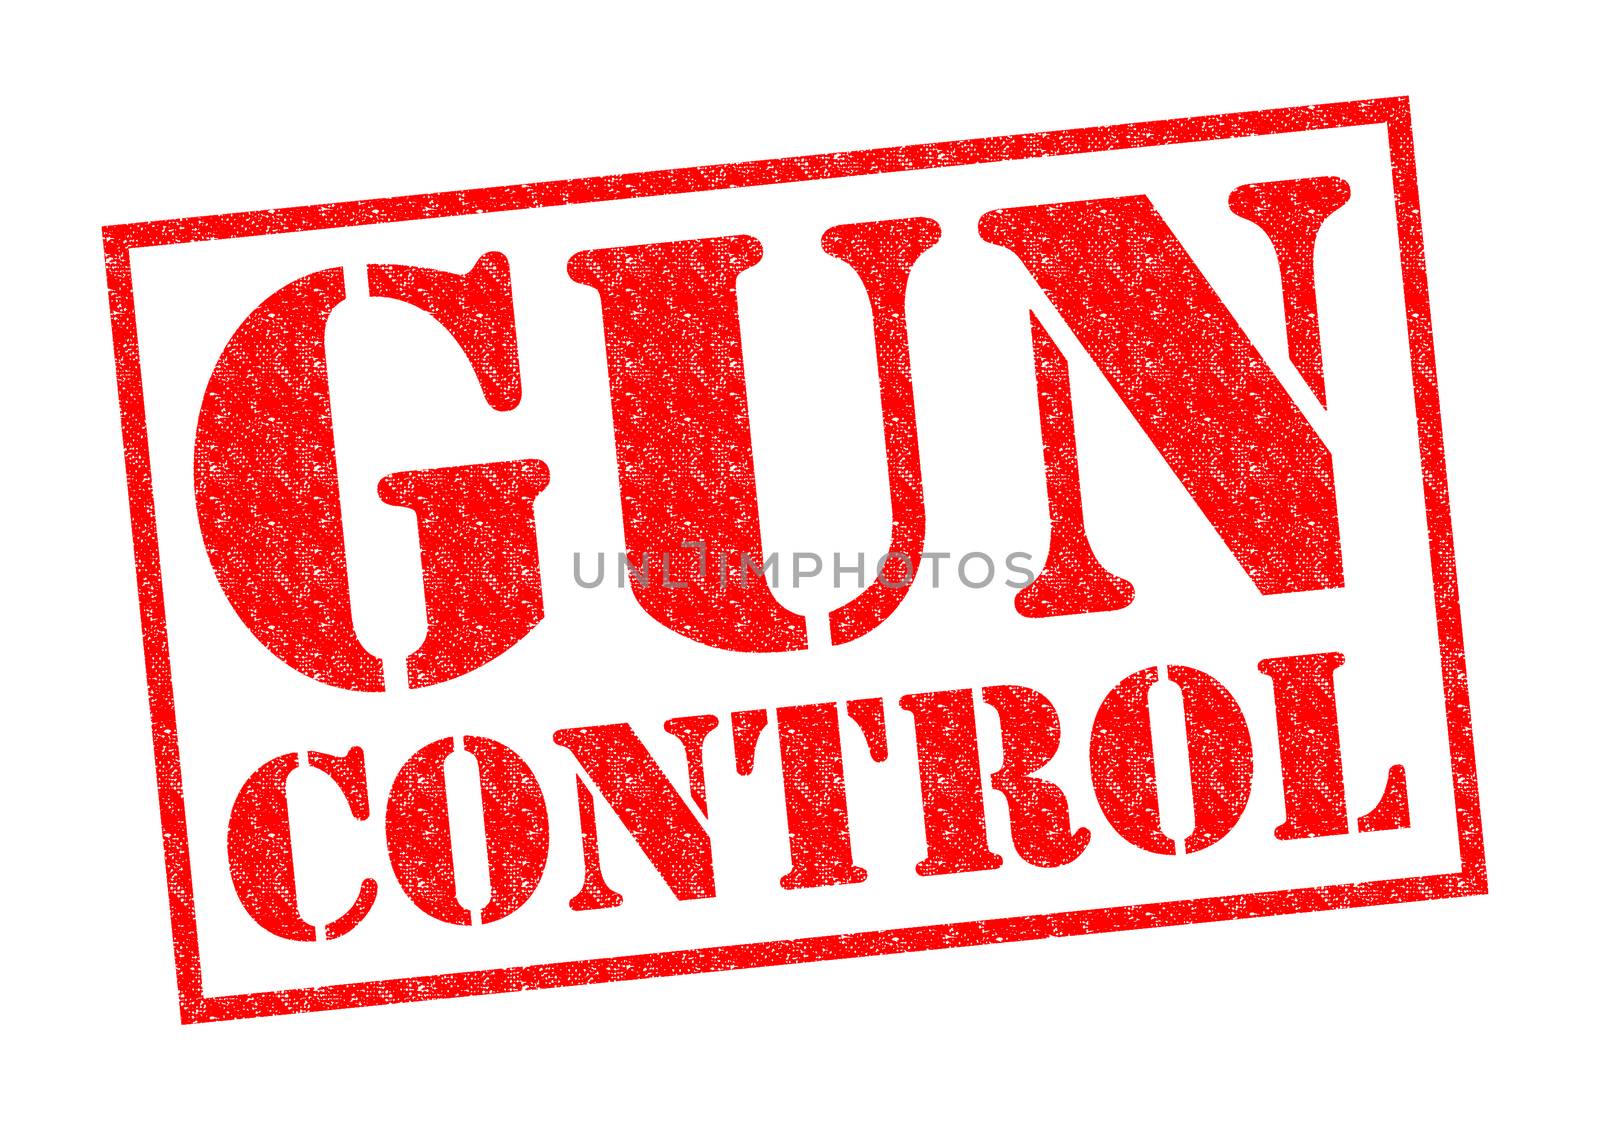 GUN CONTROL red Rubber Stamp over a white background.